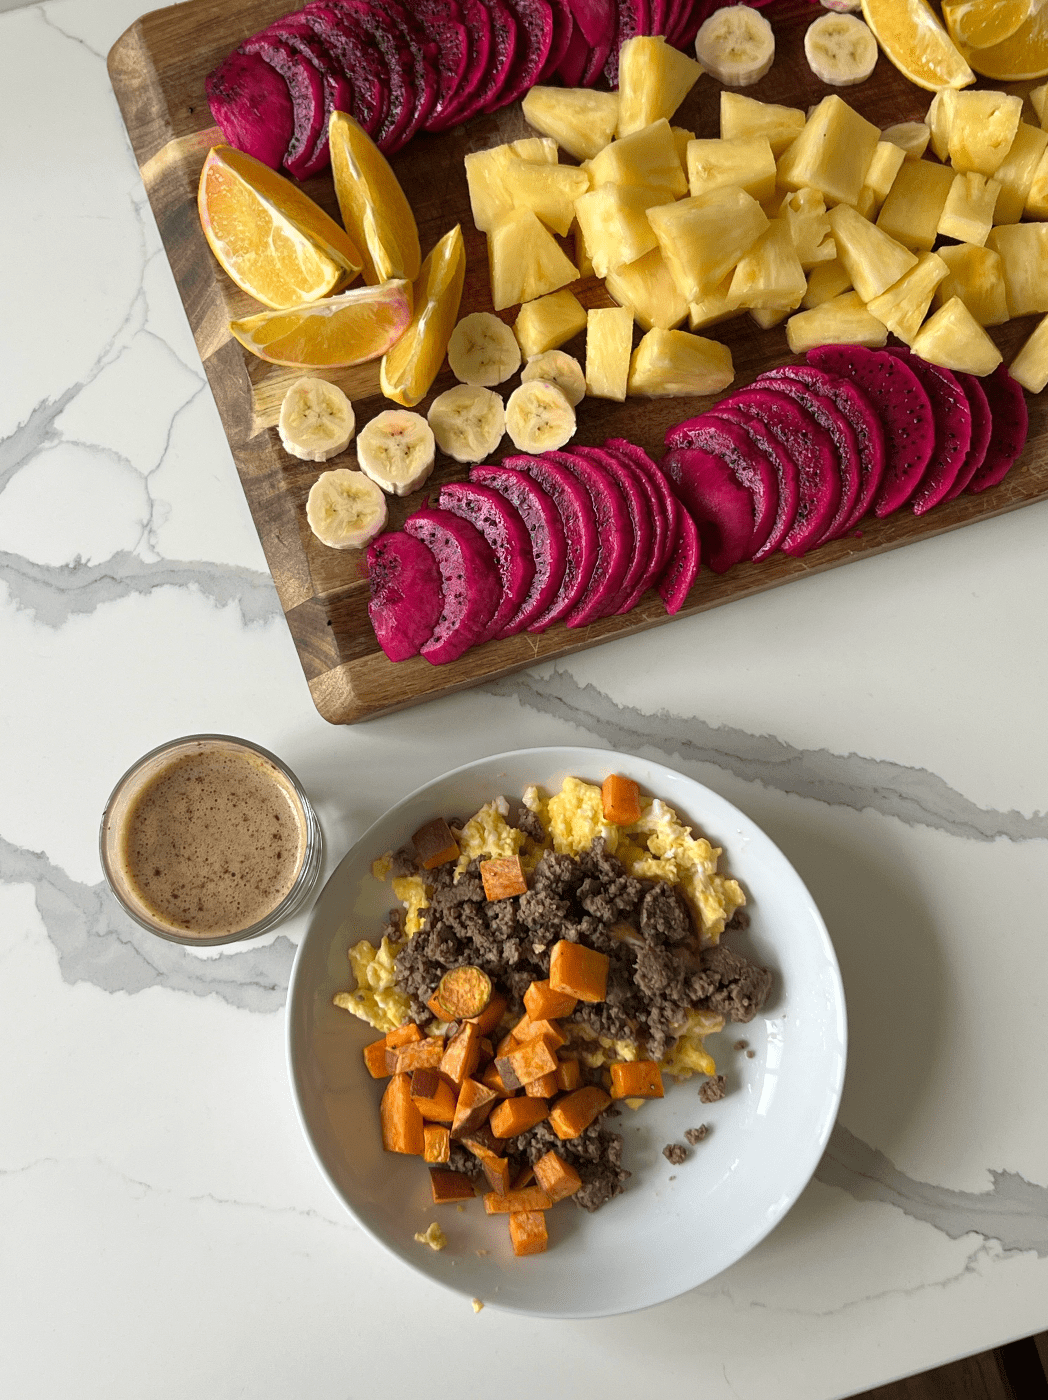 Platter of dragon fruit, bananas, oranges, and pineapple beside a coffee & plate of eggs, sweet potato and ground beef atop a marble counter top